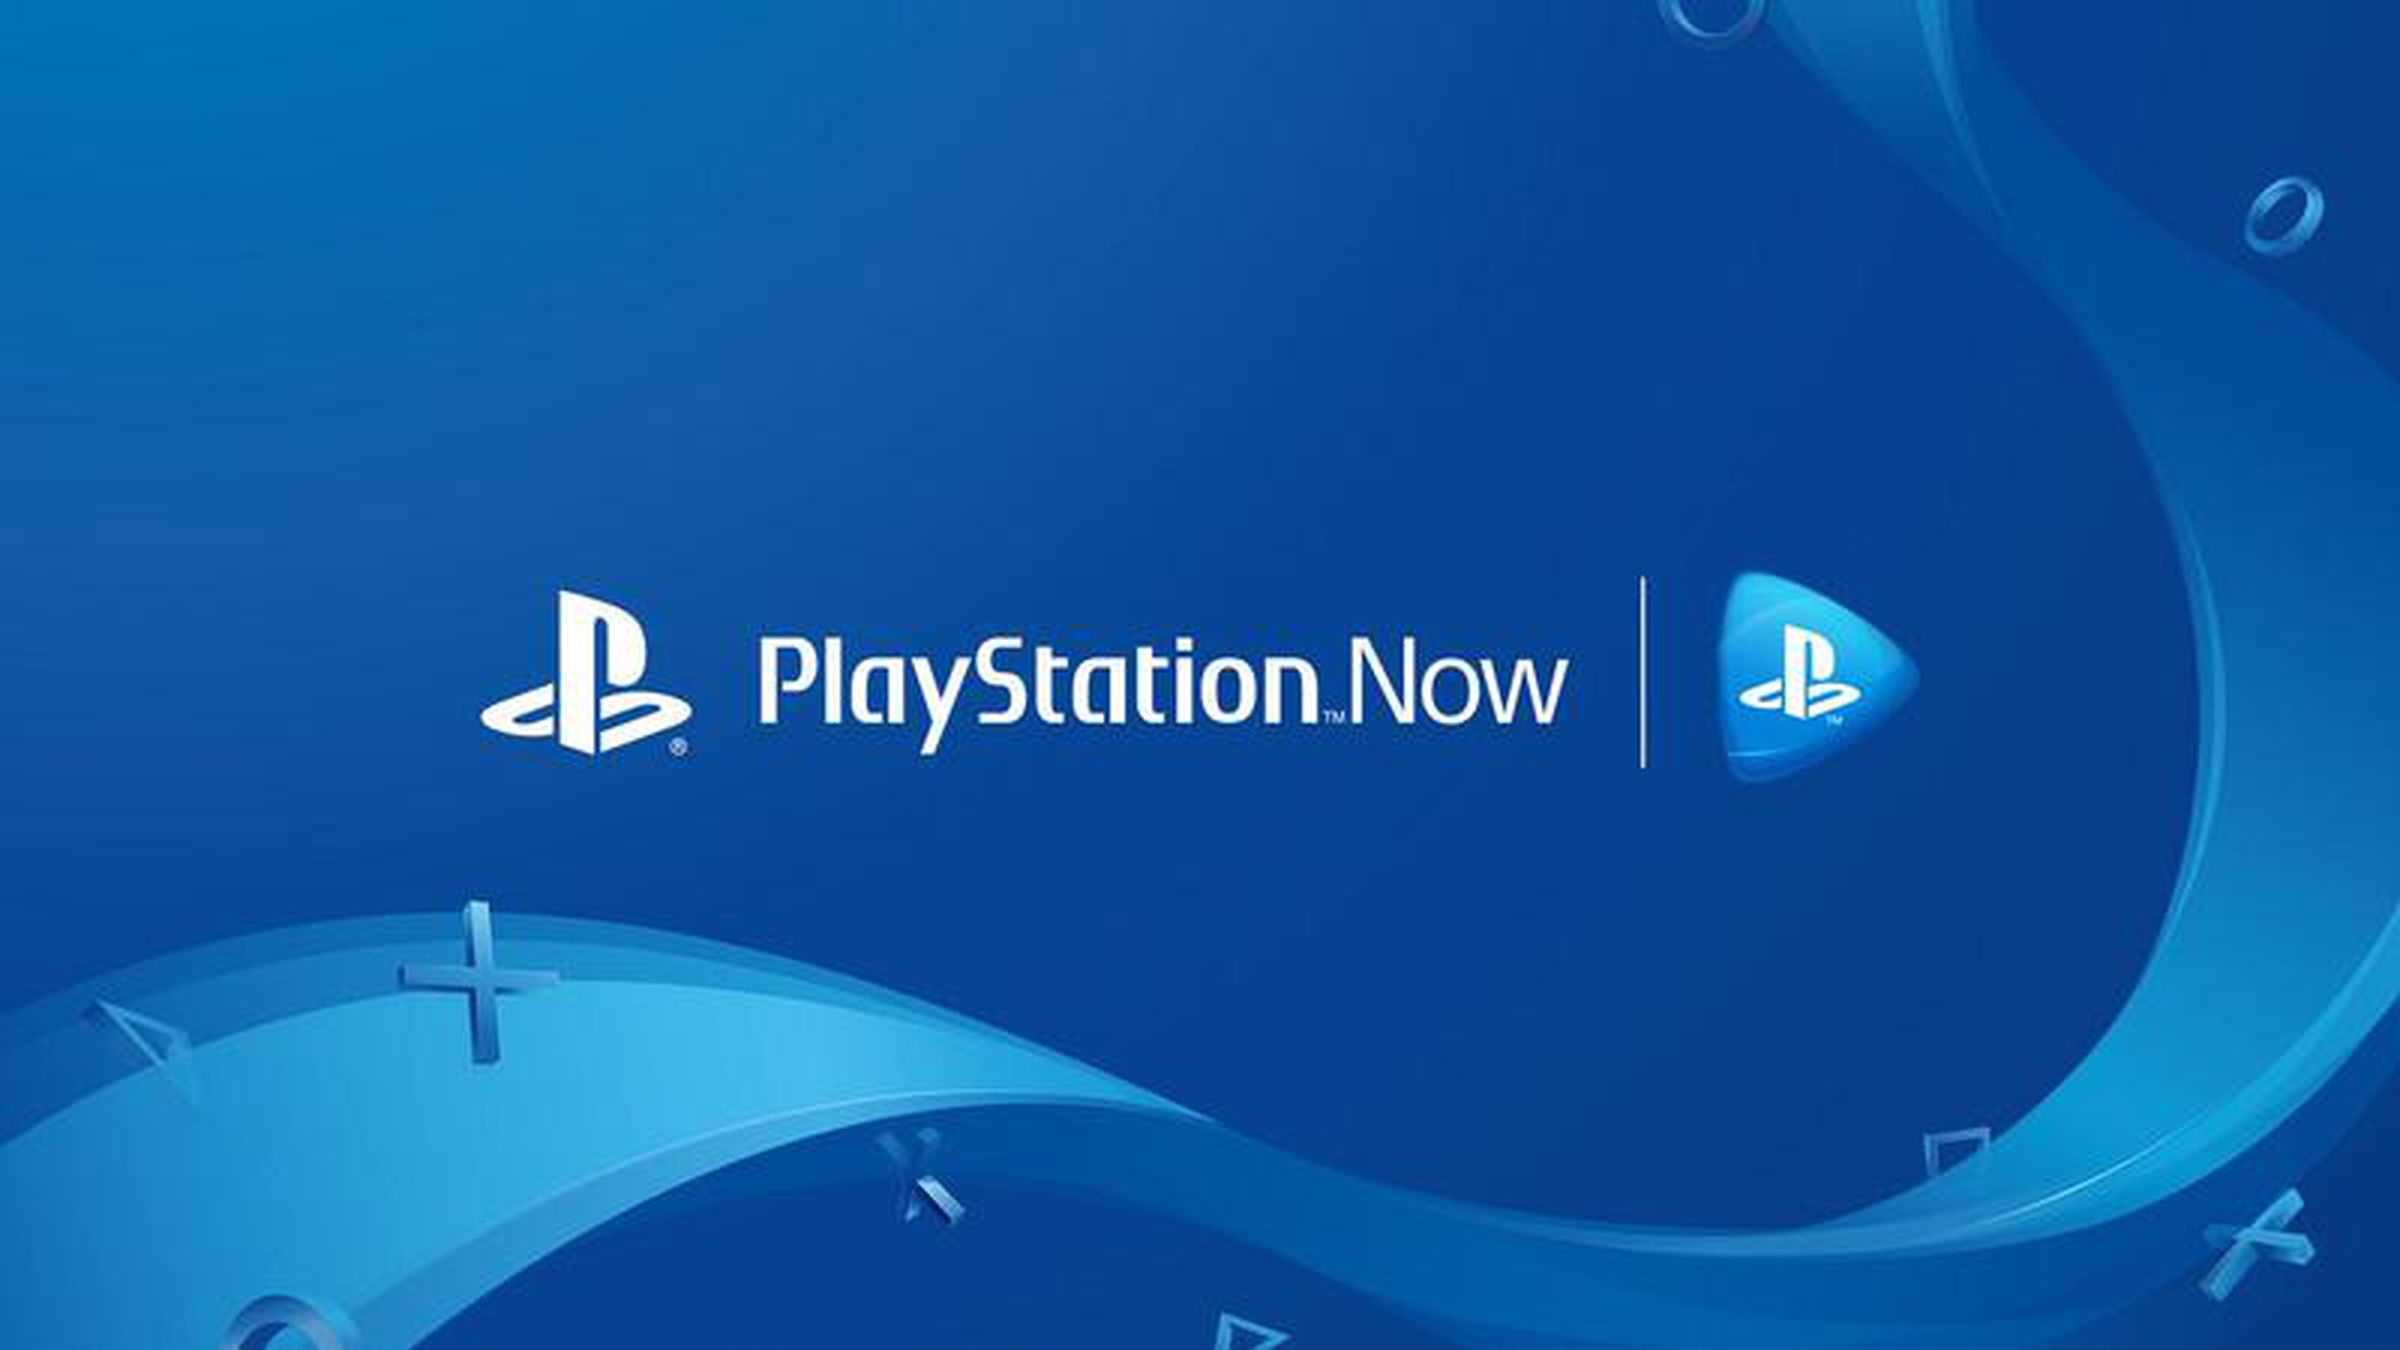 PlayStation Now is going away.